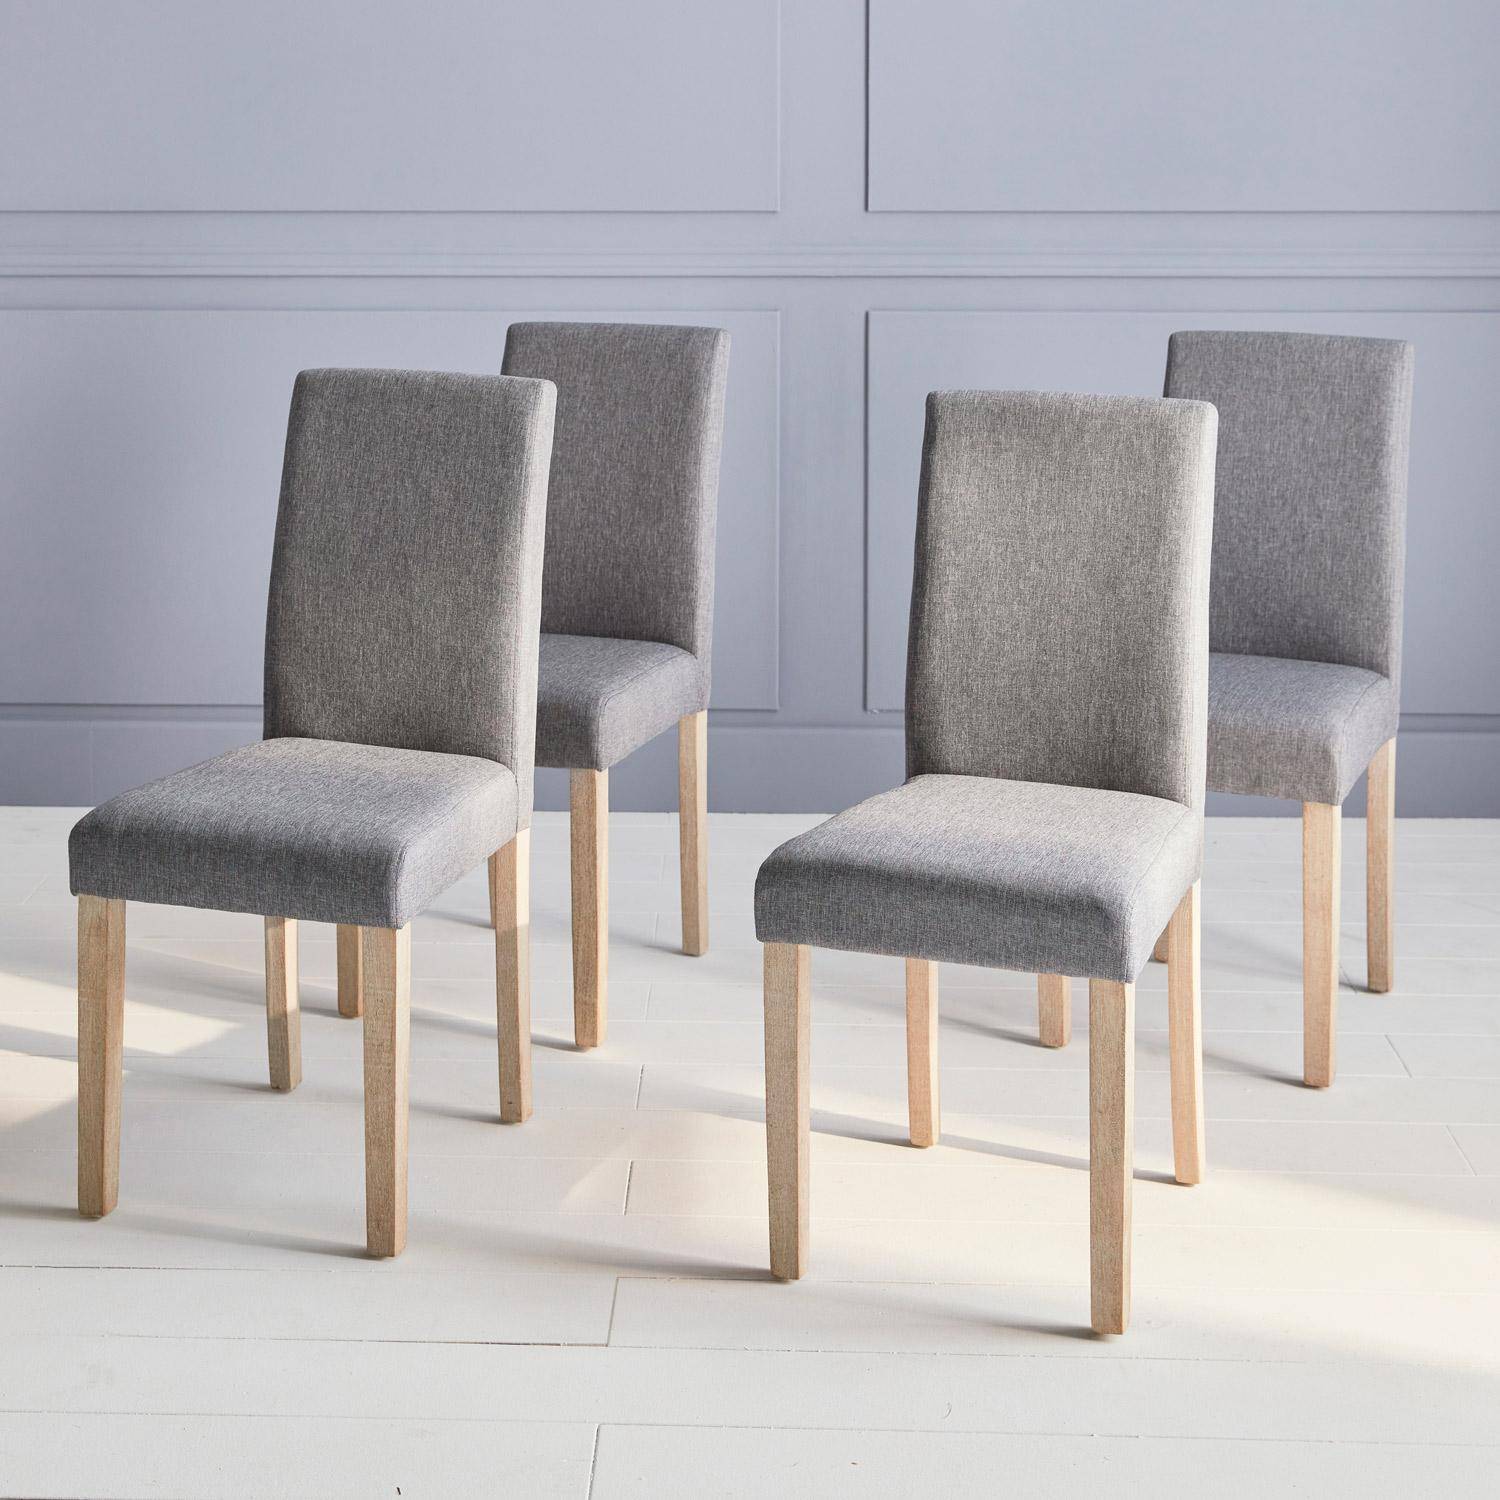 Set of 4 fabric dining chairs with wooden legs - Rita - Light grey Photo1